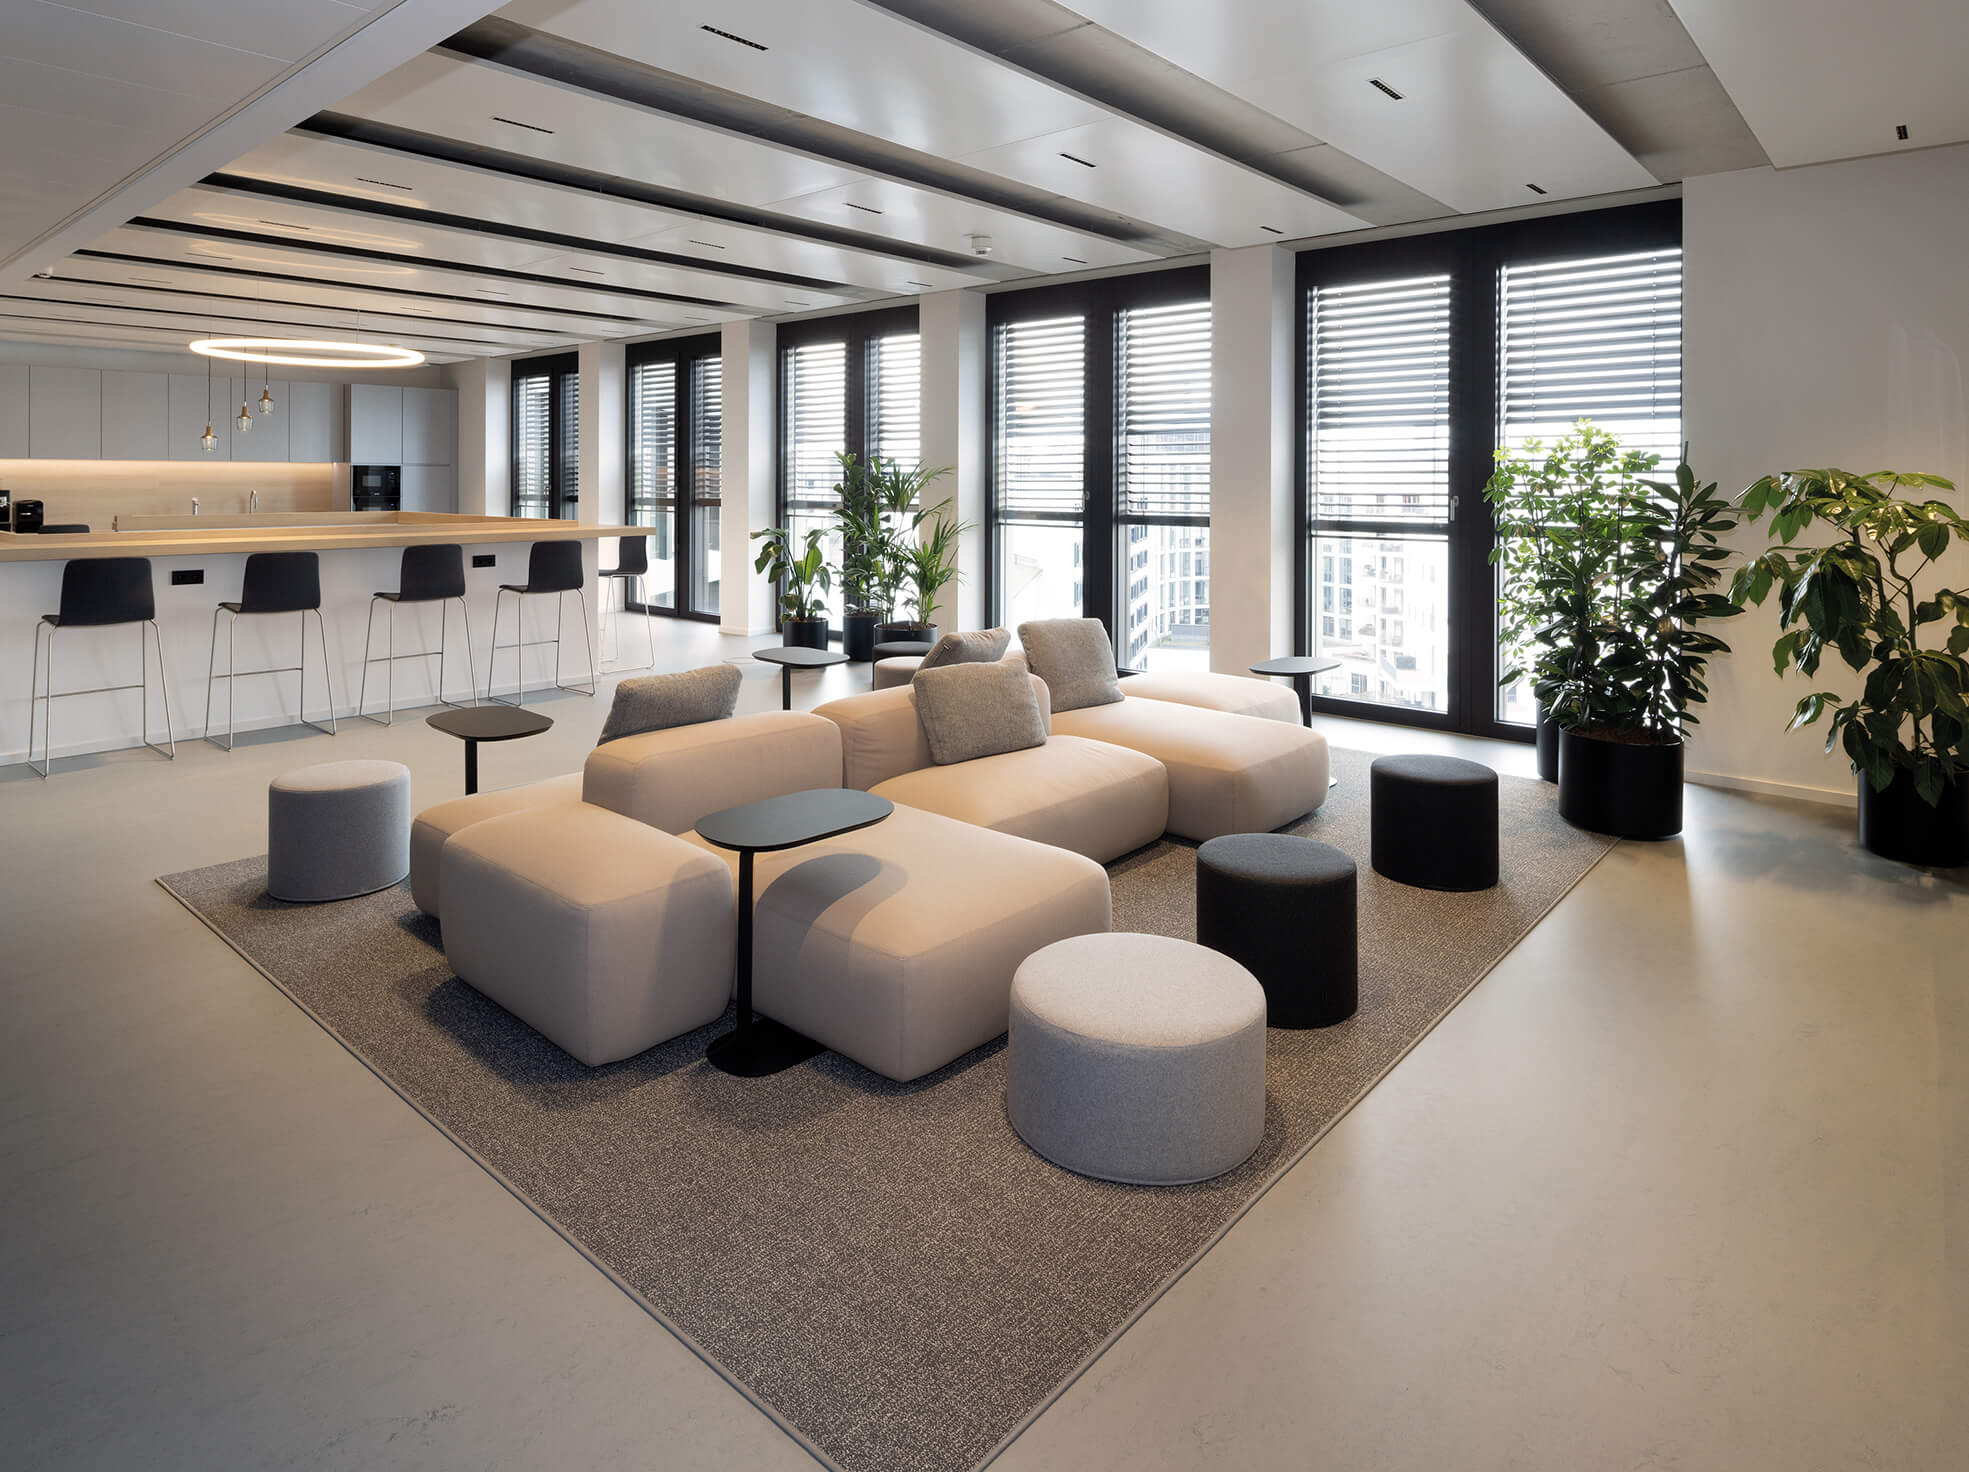 Modern office fit-out realised by Display International as general contractor.